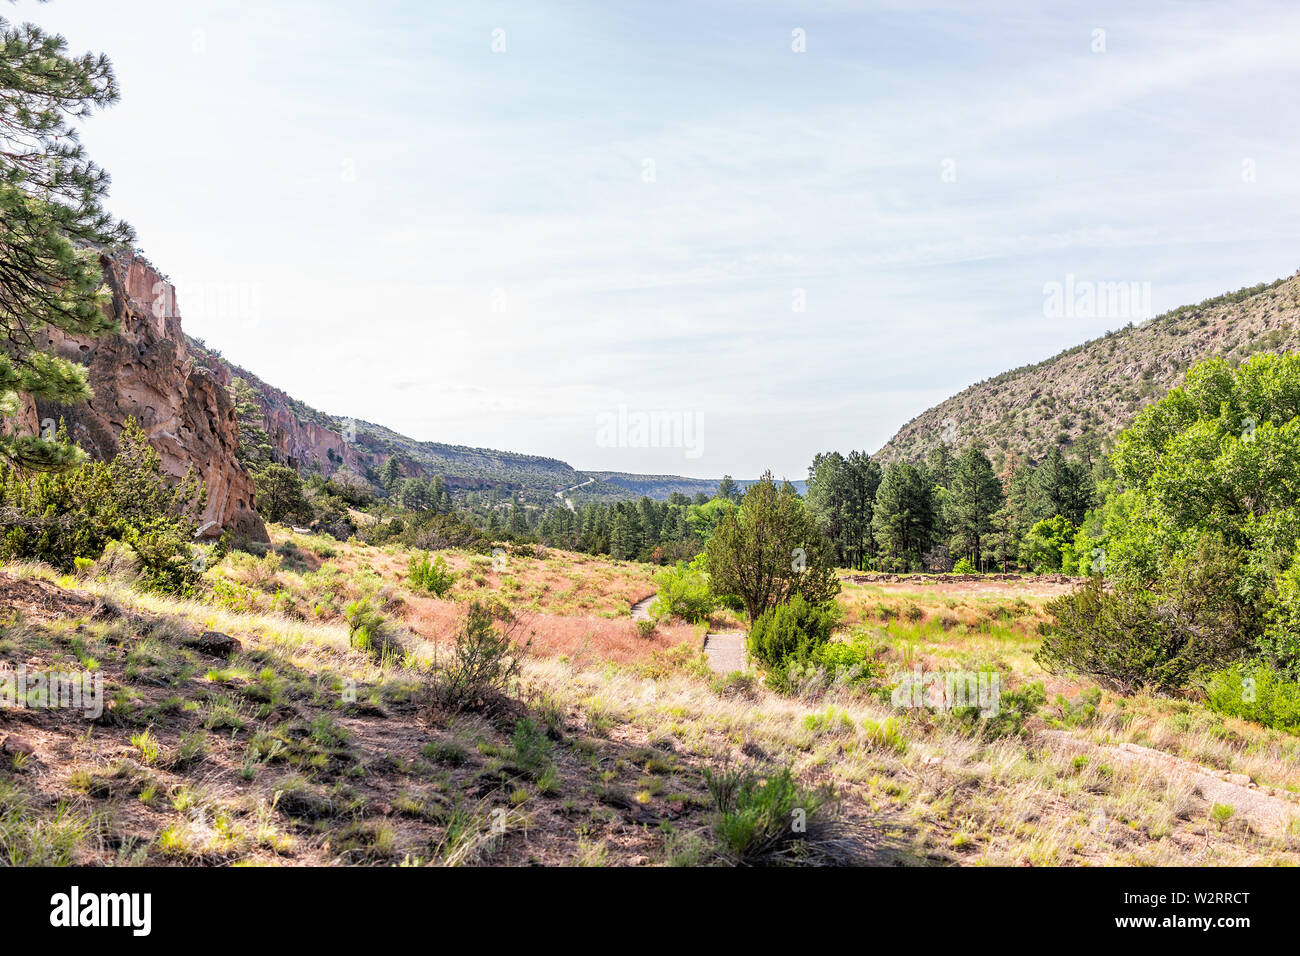 Park landscape view from Main Loop trail path in Bandelier National Monument in New Mexico Stock Photo